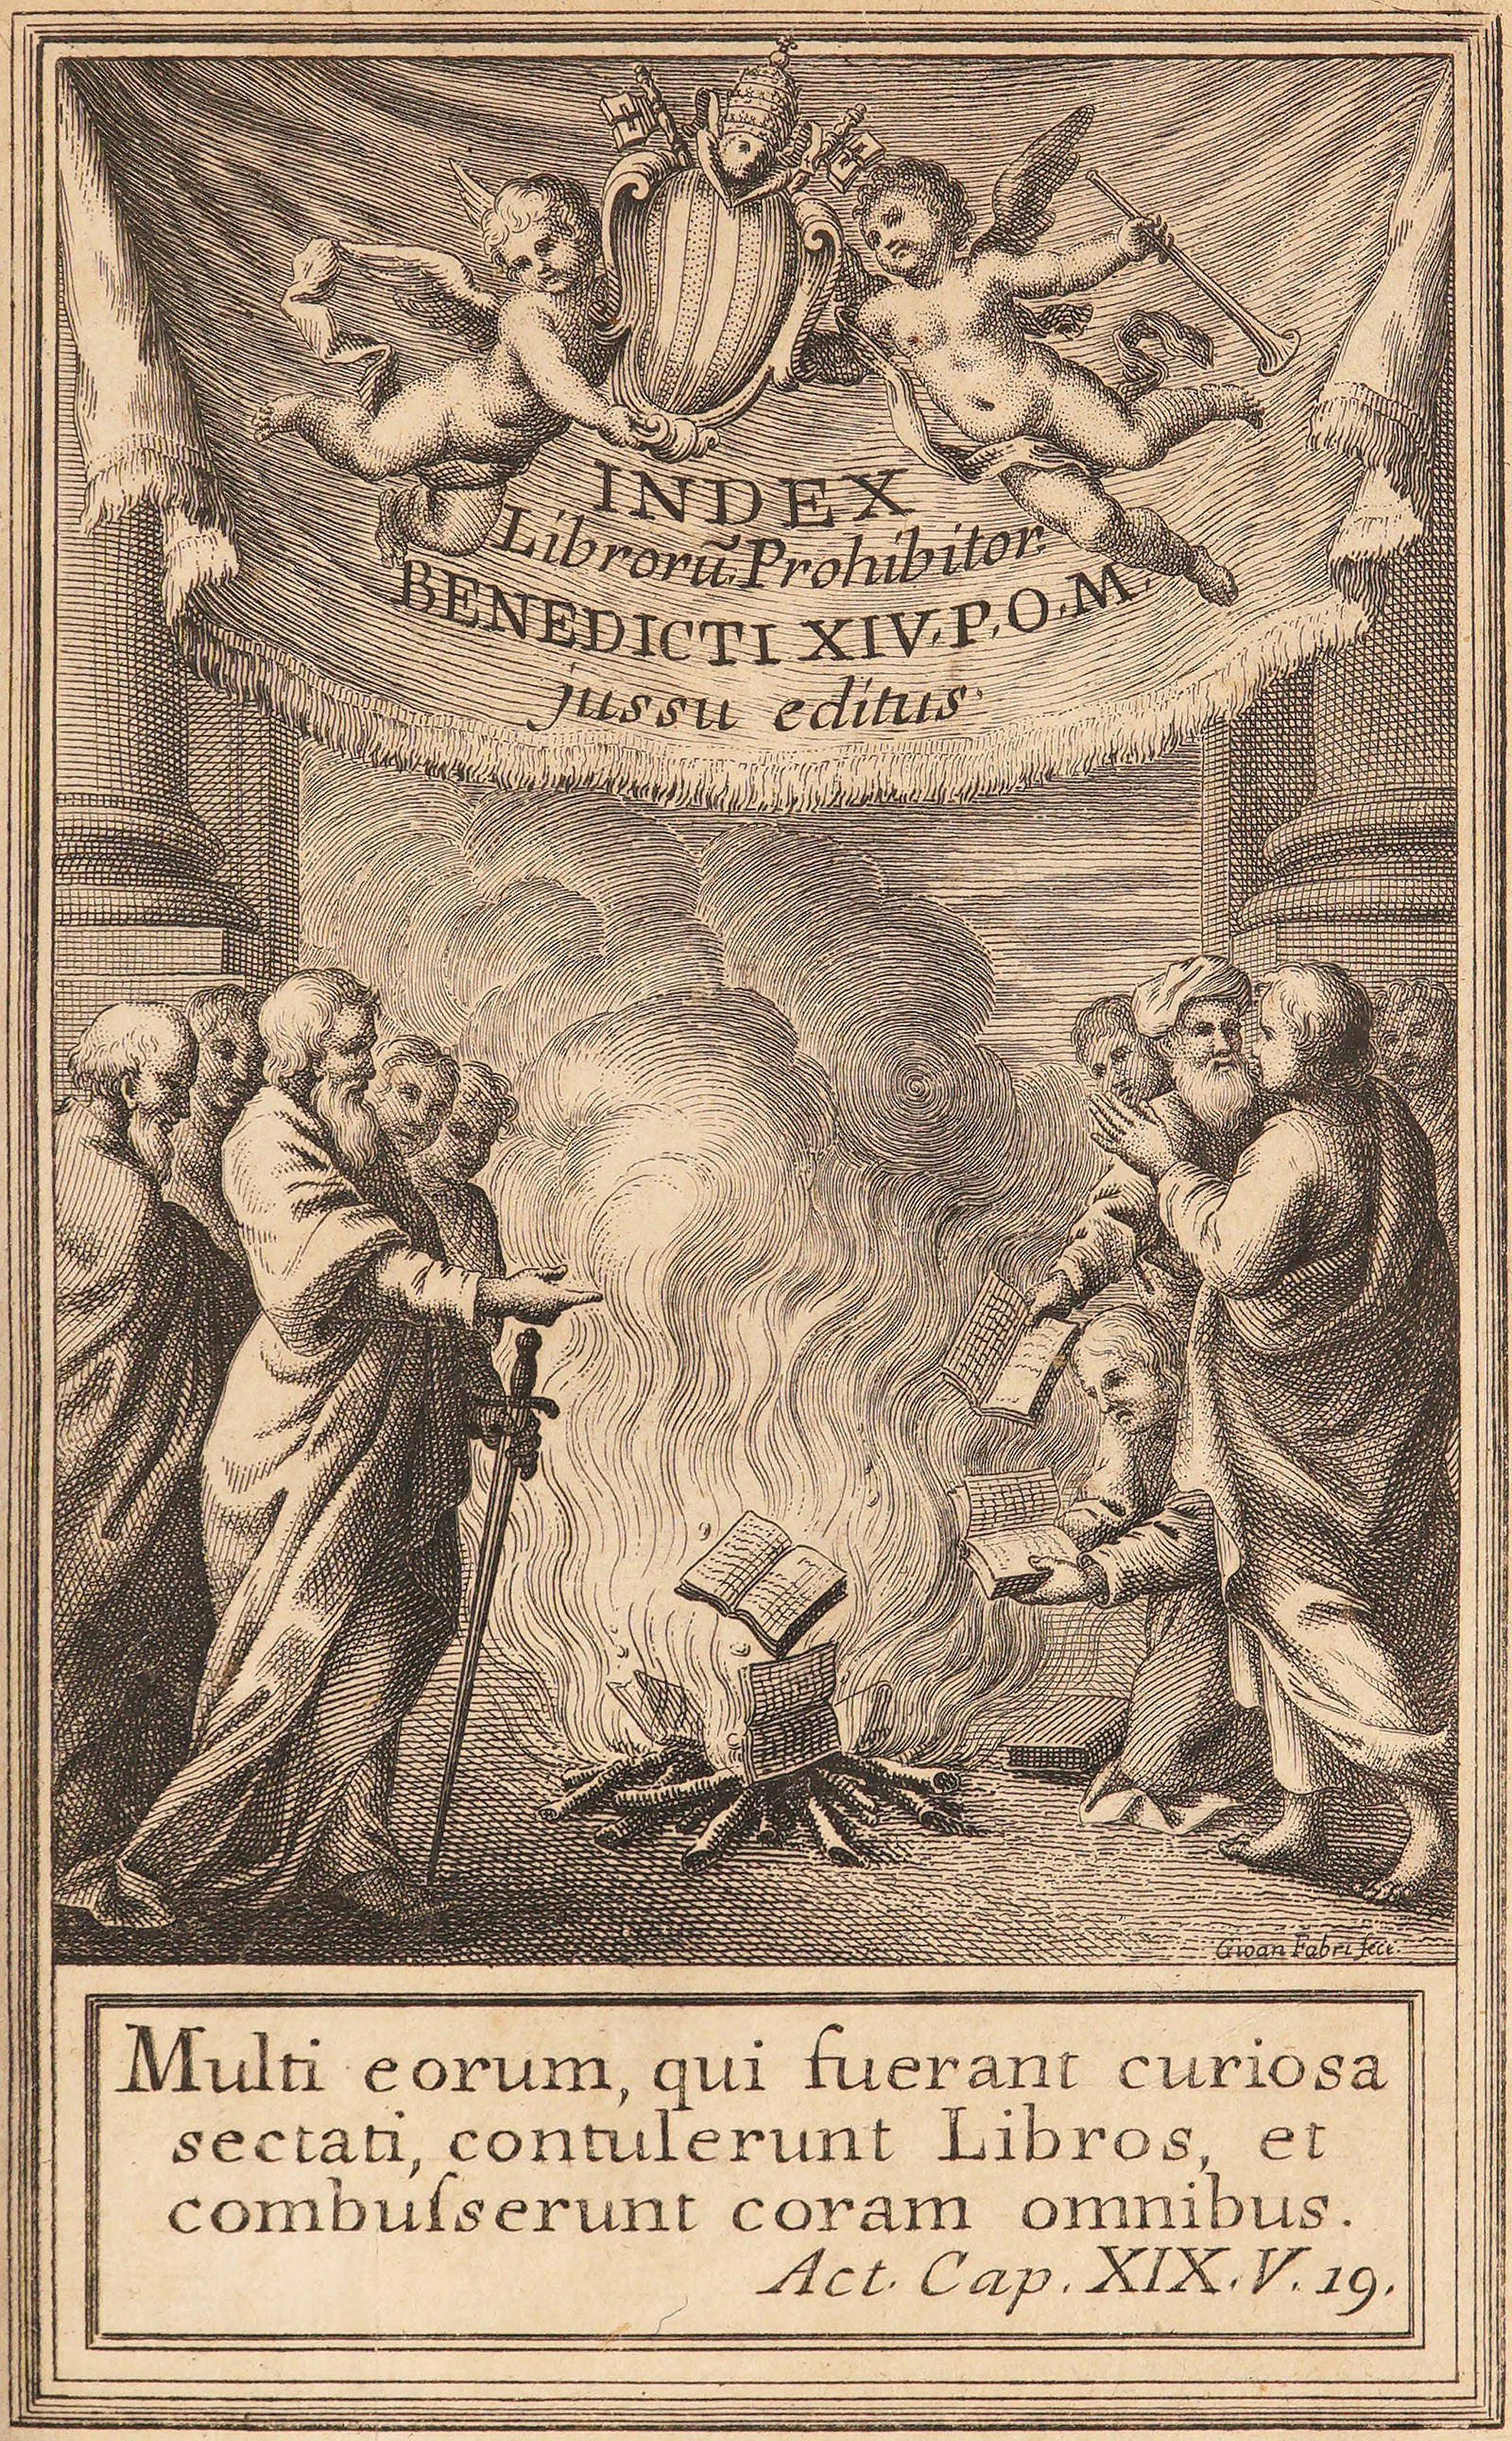 Frontispiece of the Index of Prohibited Books under Pope Benedict XIV